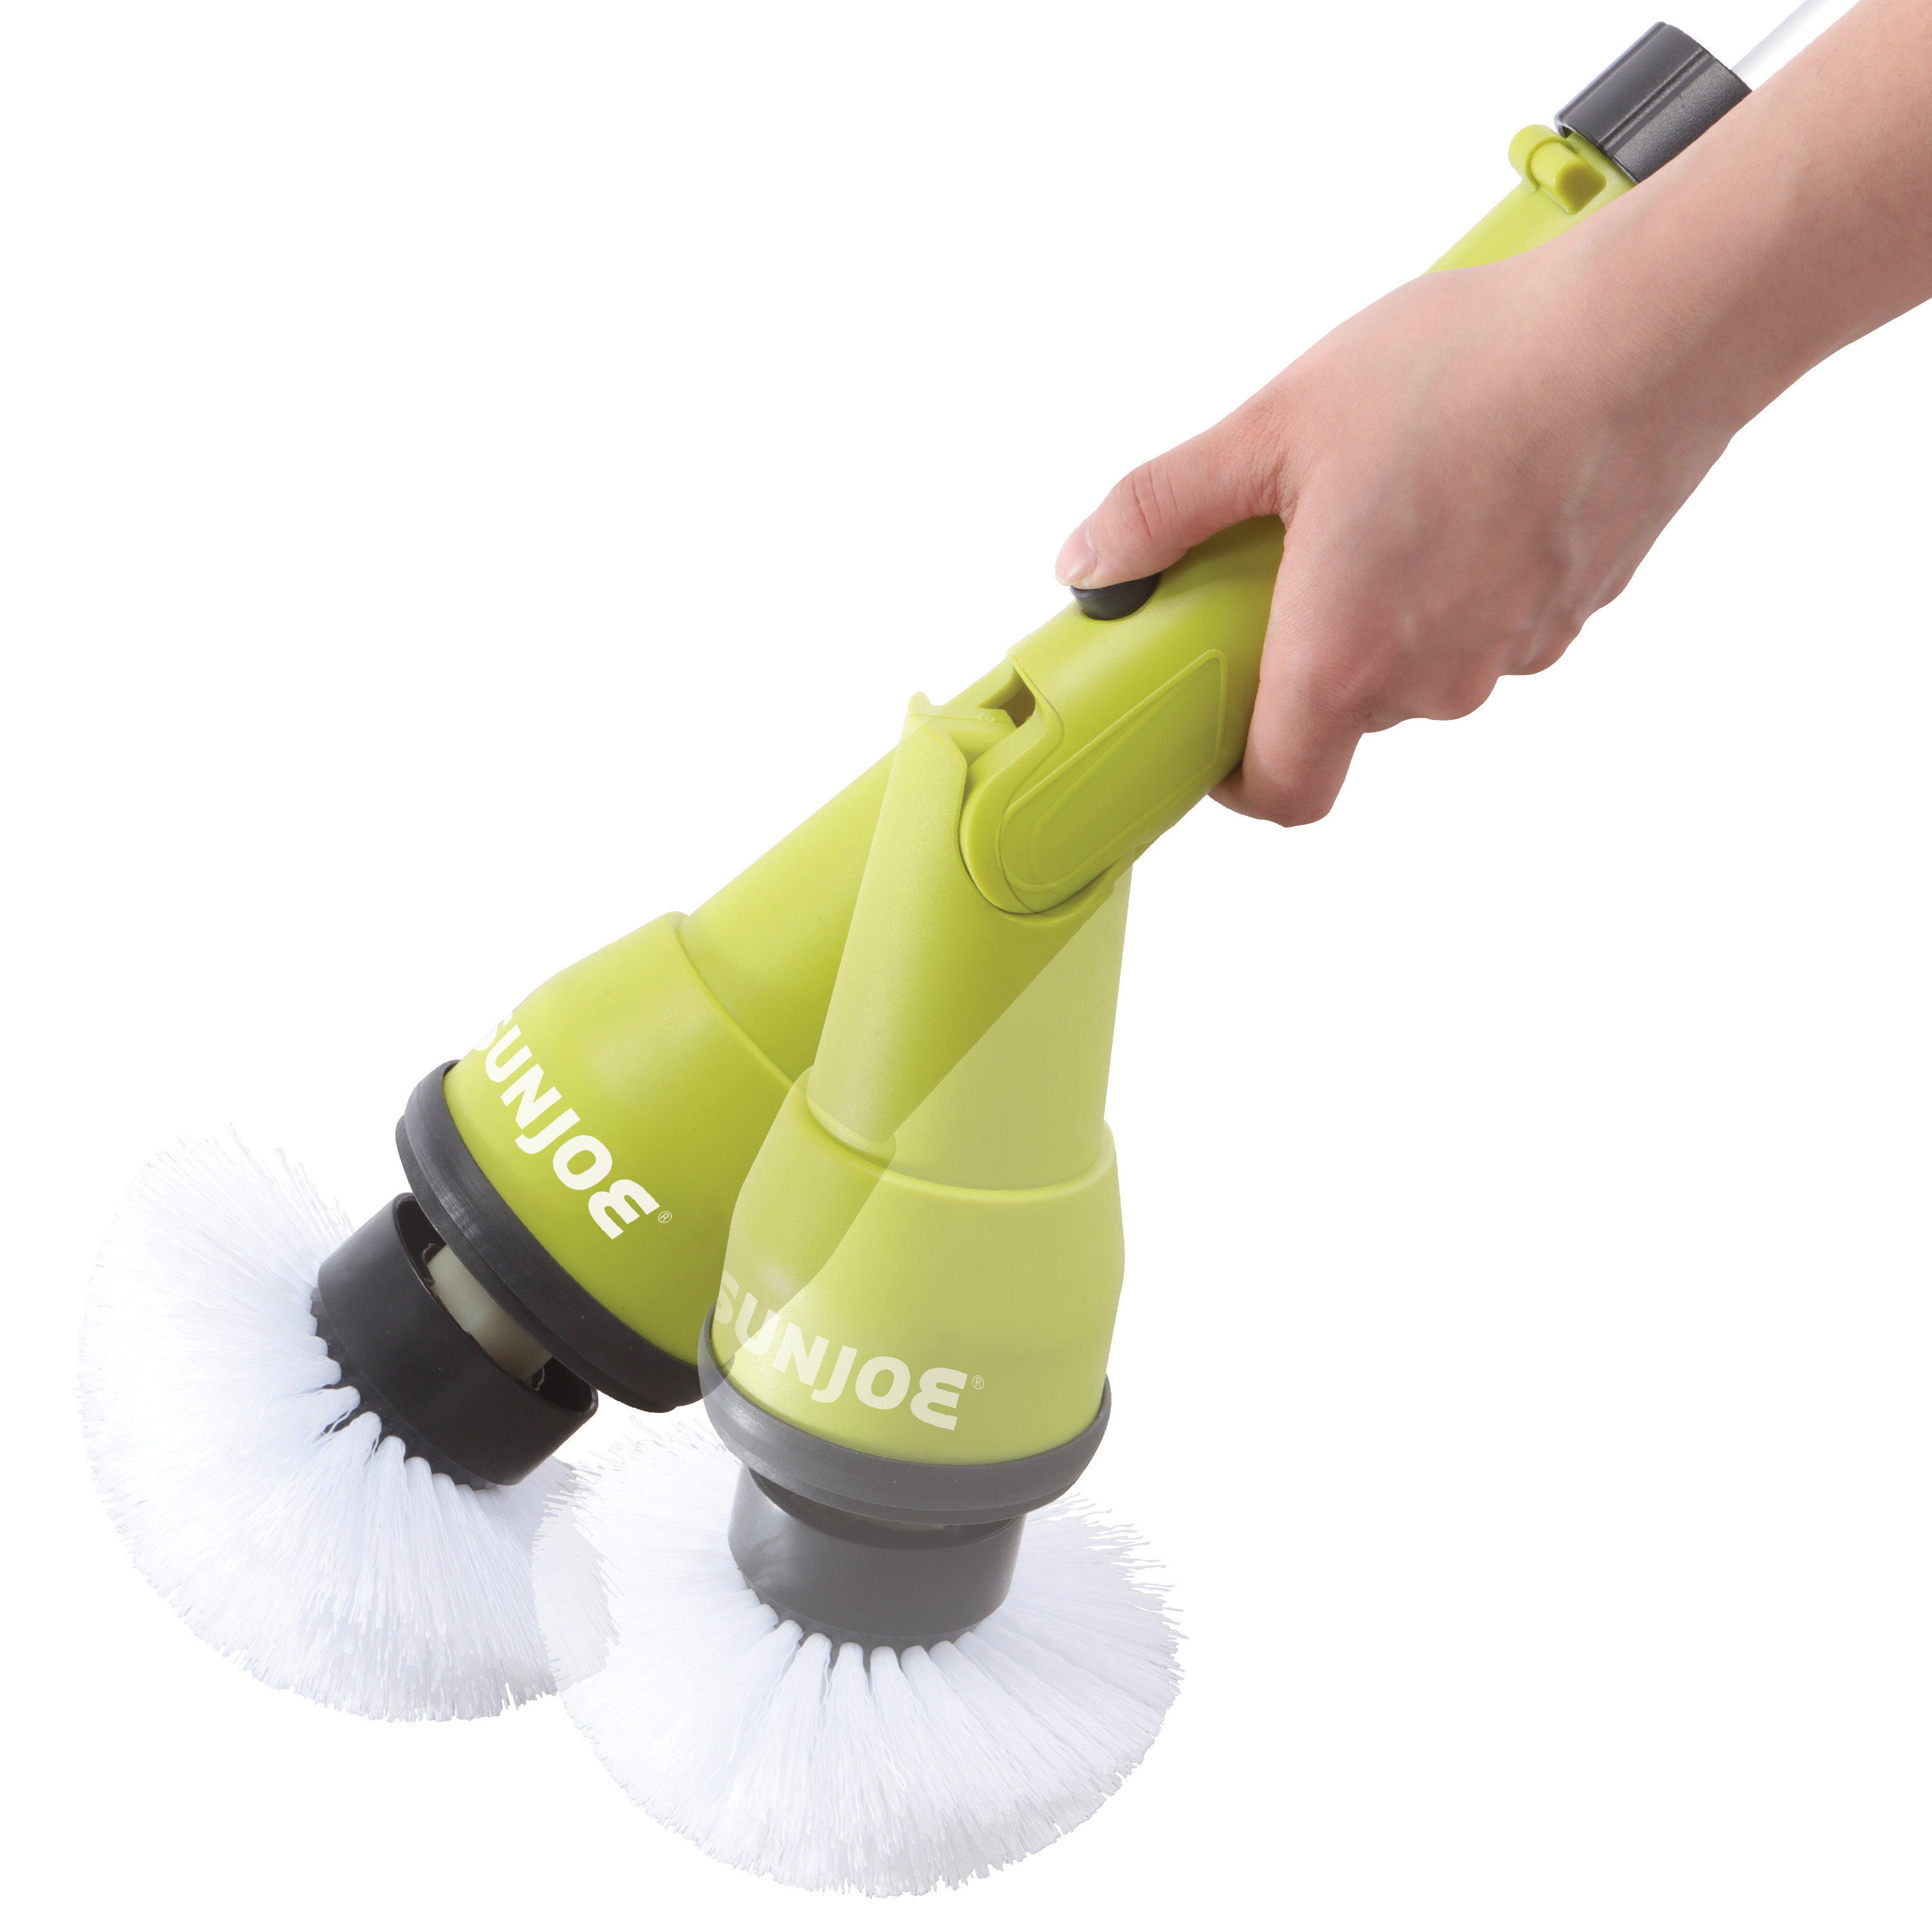 Pro Grade Cleaning Power Outdoors with 360° Rentables